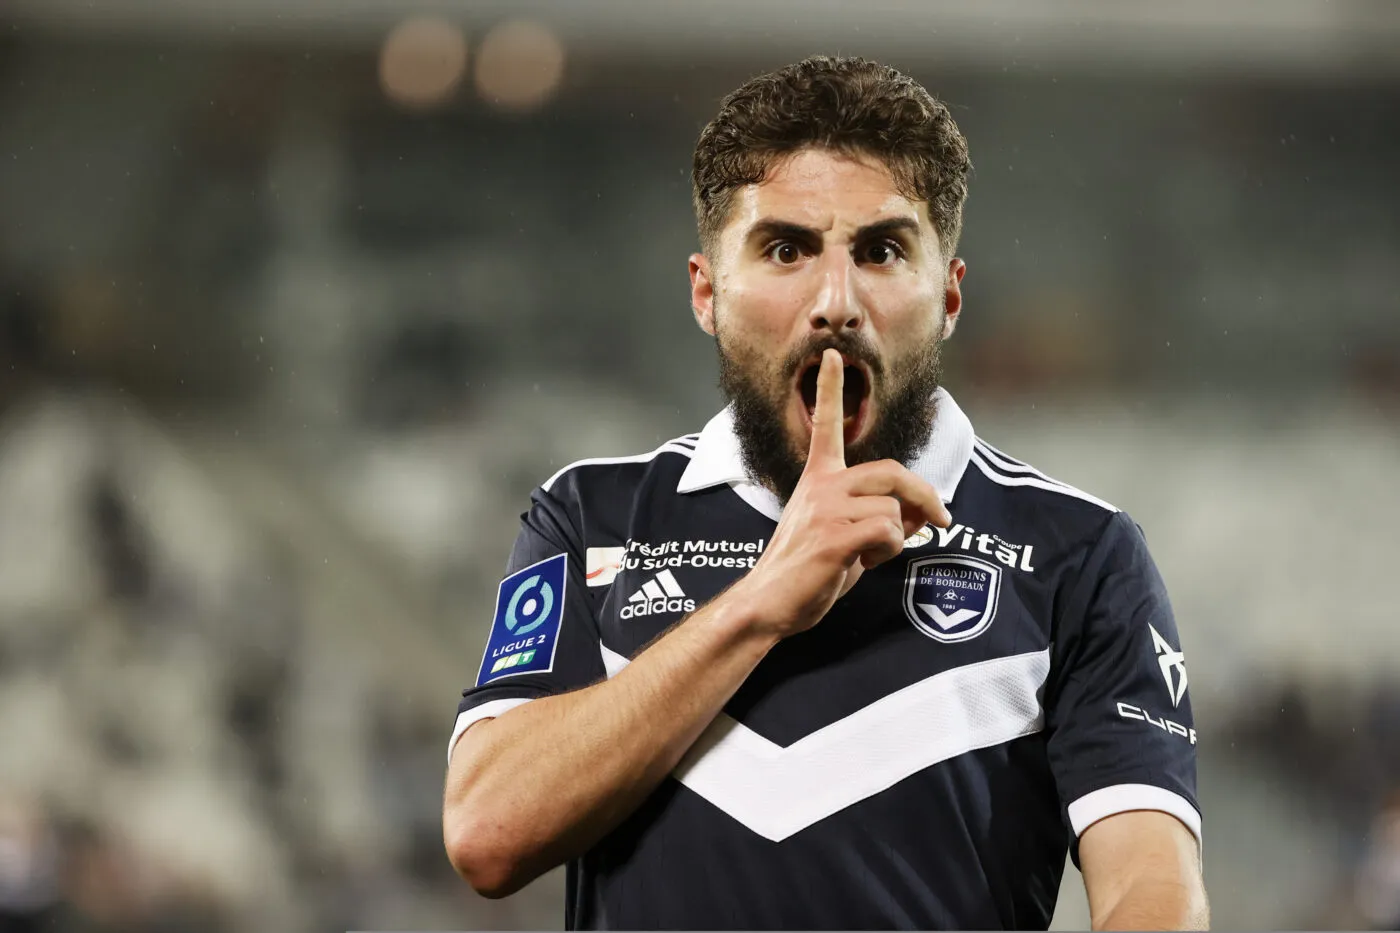 30 Zuriko DAVITASHVILI (fcgb) during the Ligue 2 BKT match between Bordeaux and Grenoble at Stade Matmut Atlantique on April 24, 2023 in Bordeaux, France. (Photo by Romain Perrocheau/FEP/Icon Sport)